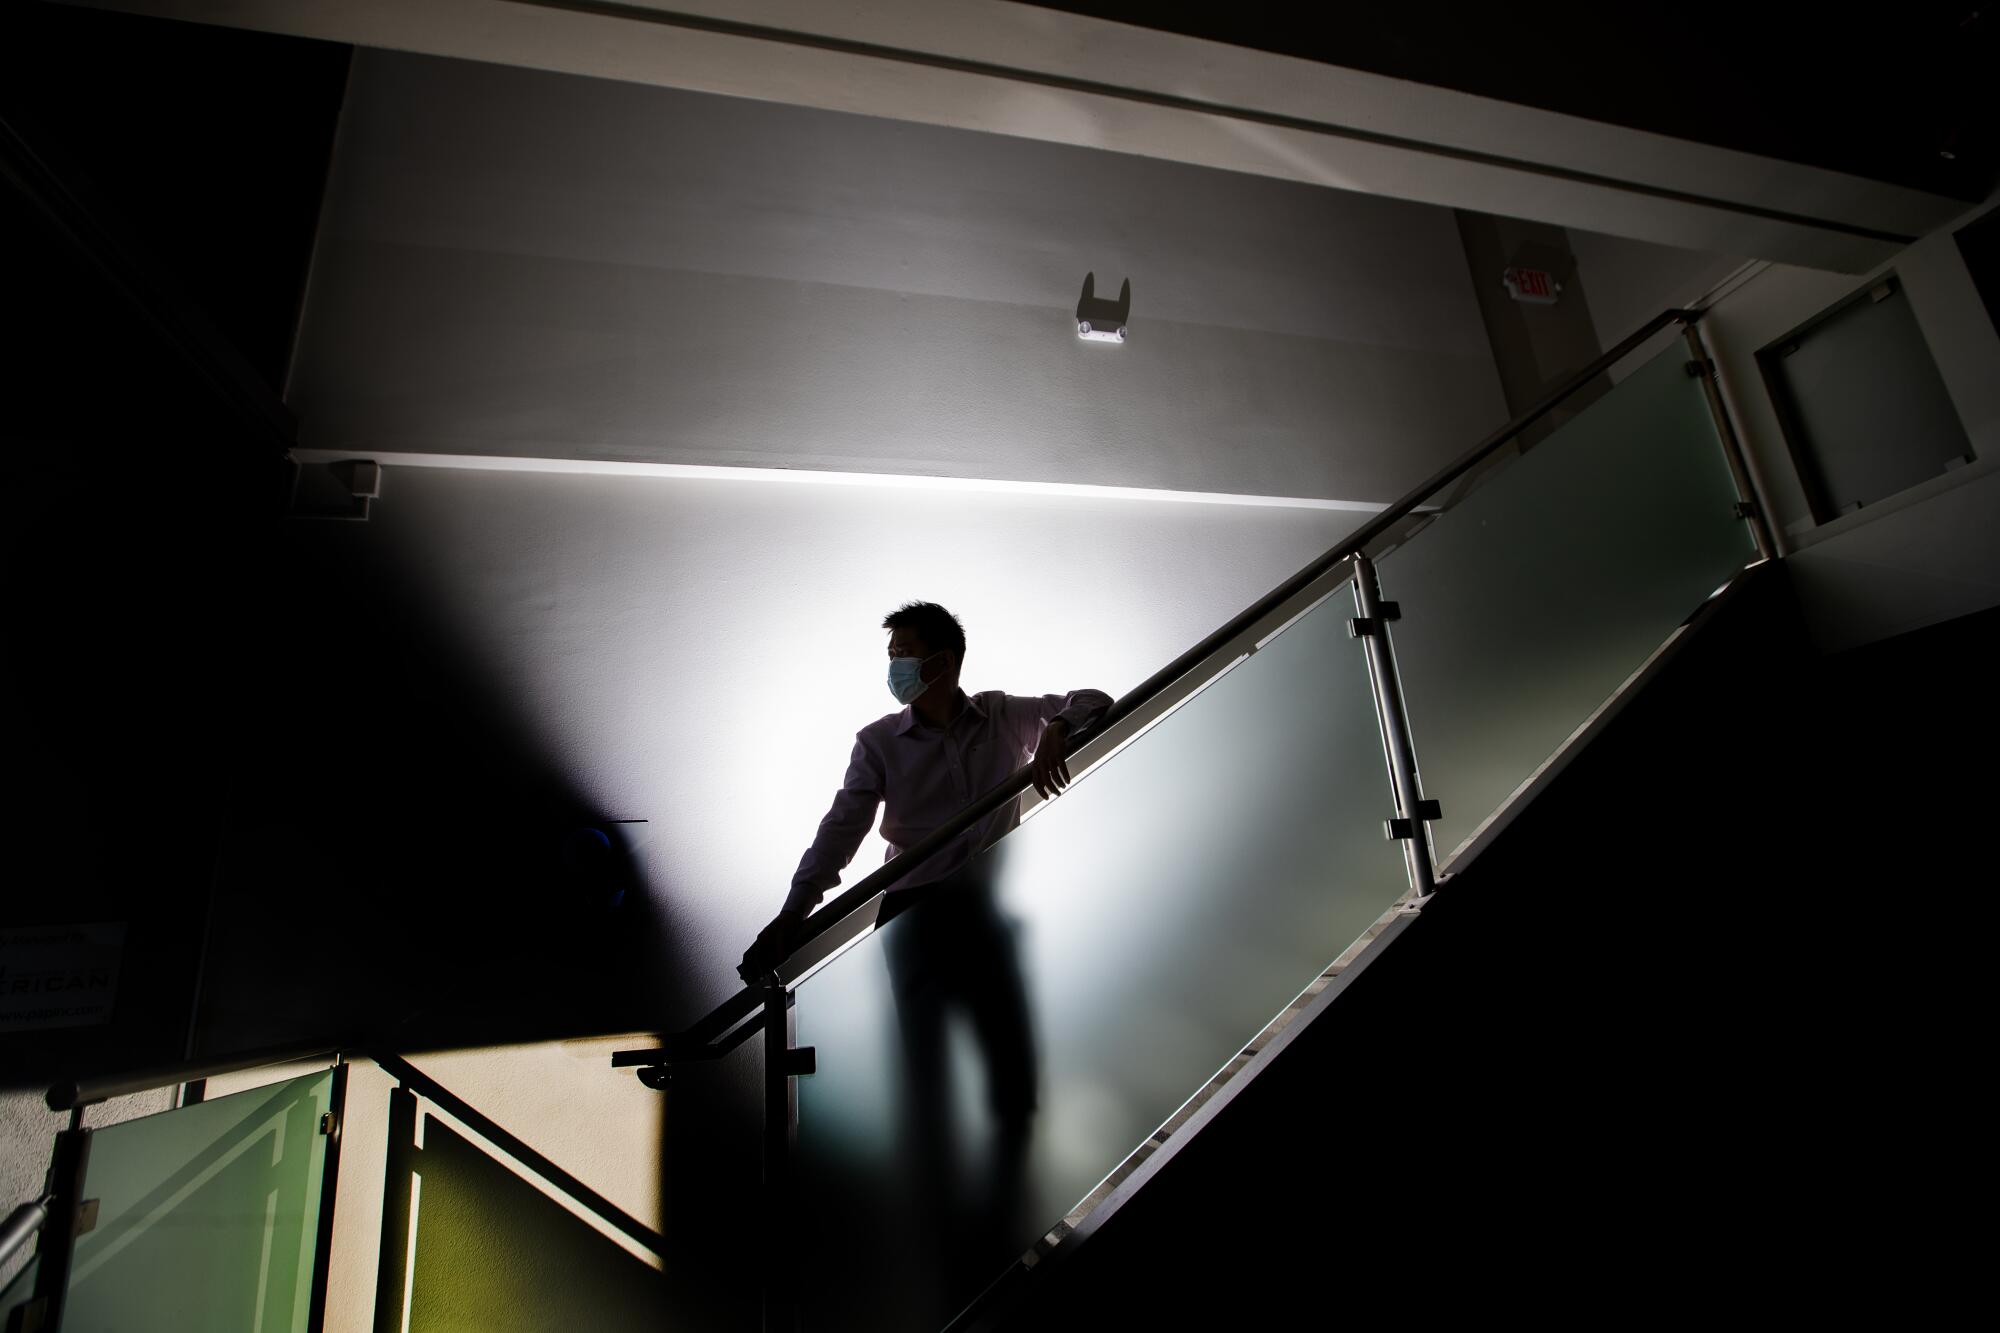 A man in shadows stands on a staircase